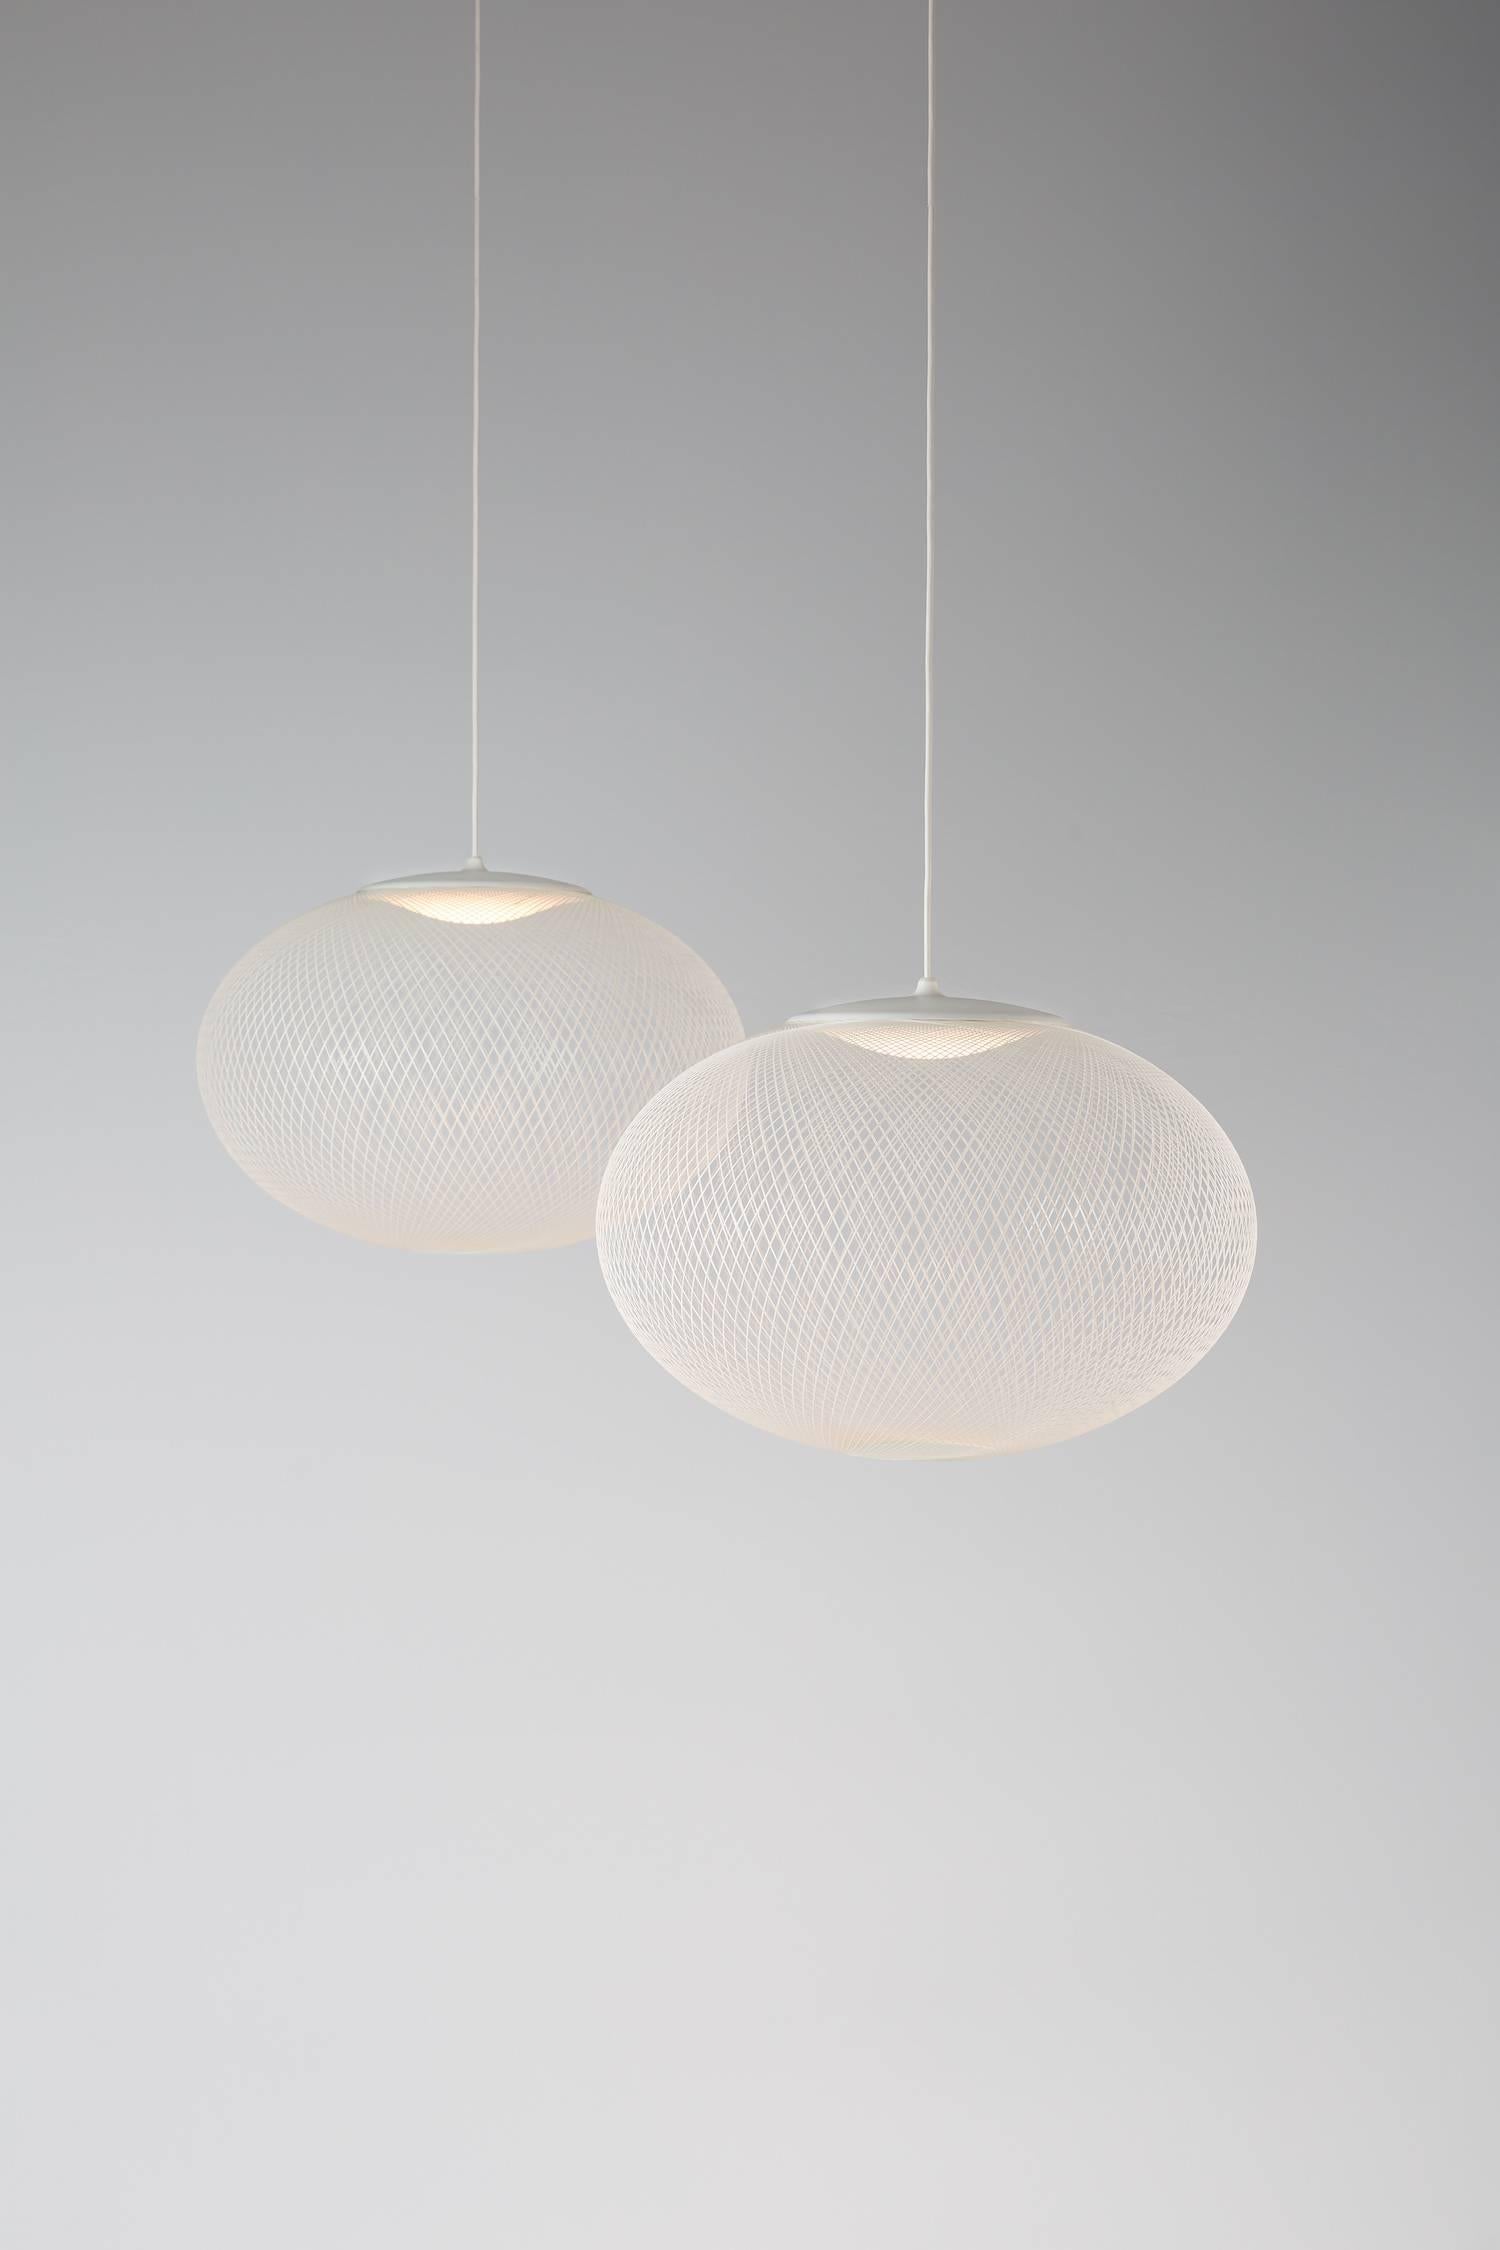 NR2 Medium White Suspension Lamp with Integrated LED by Bertjan Pot for Moooi For Sale 4